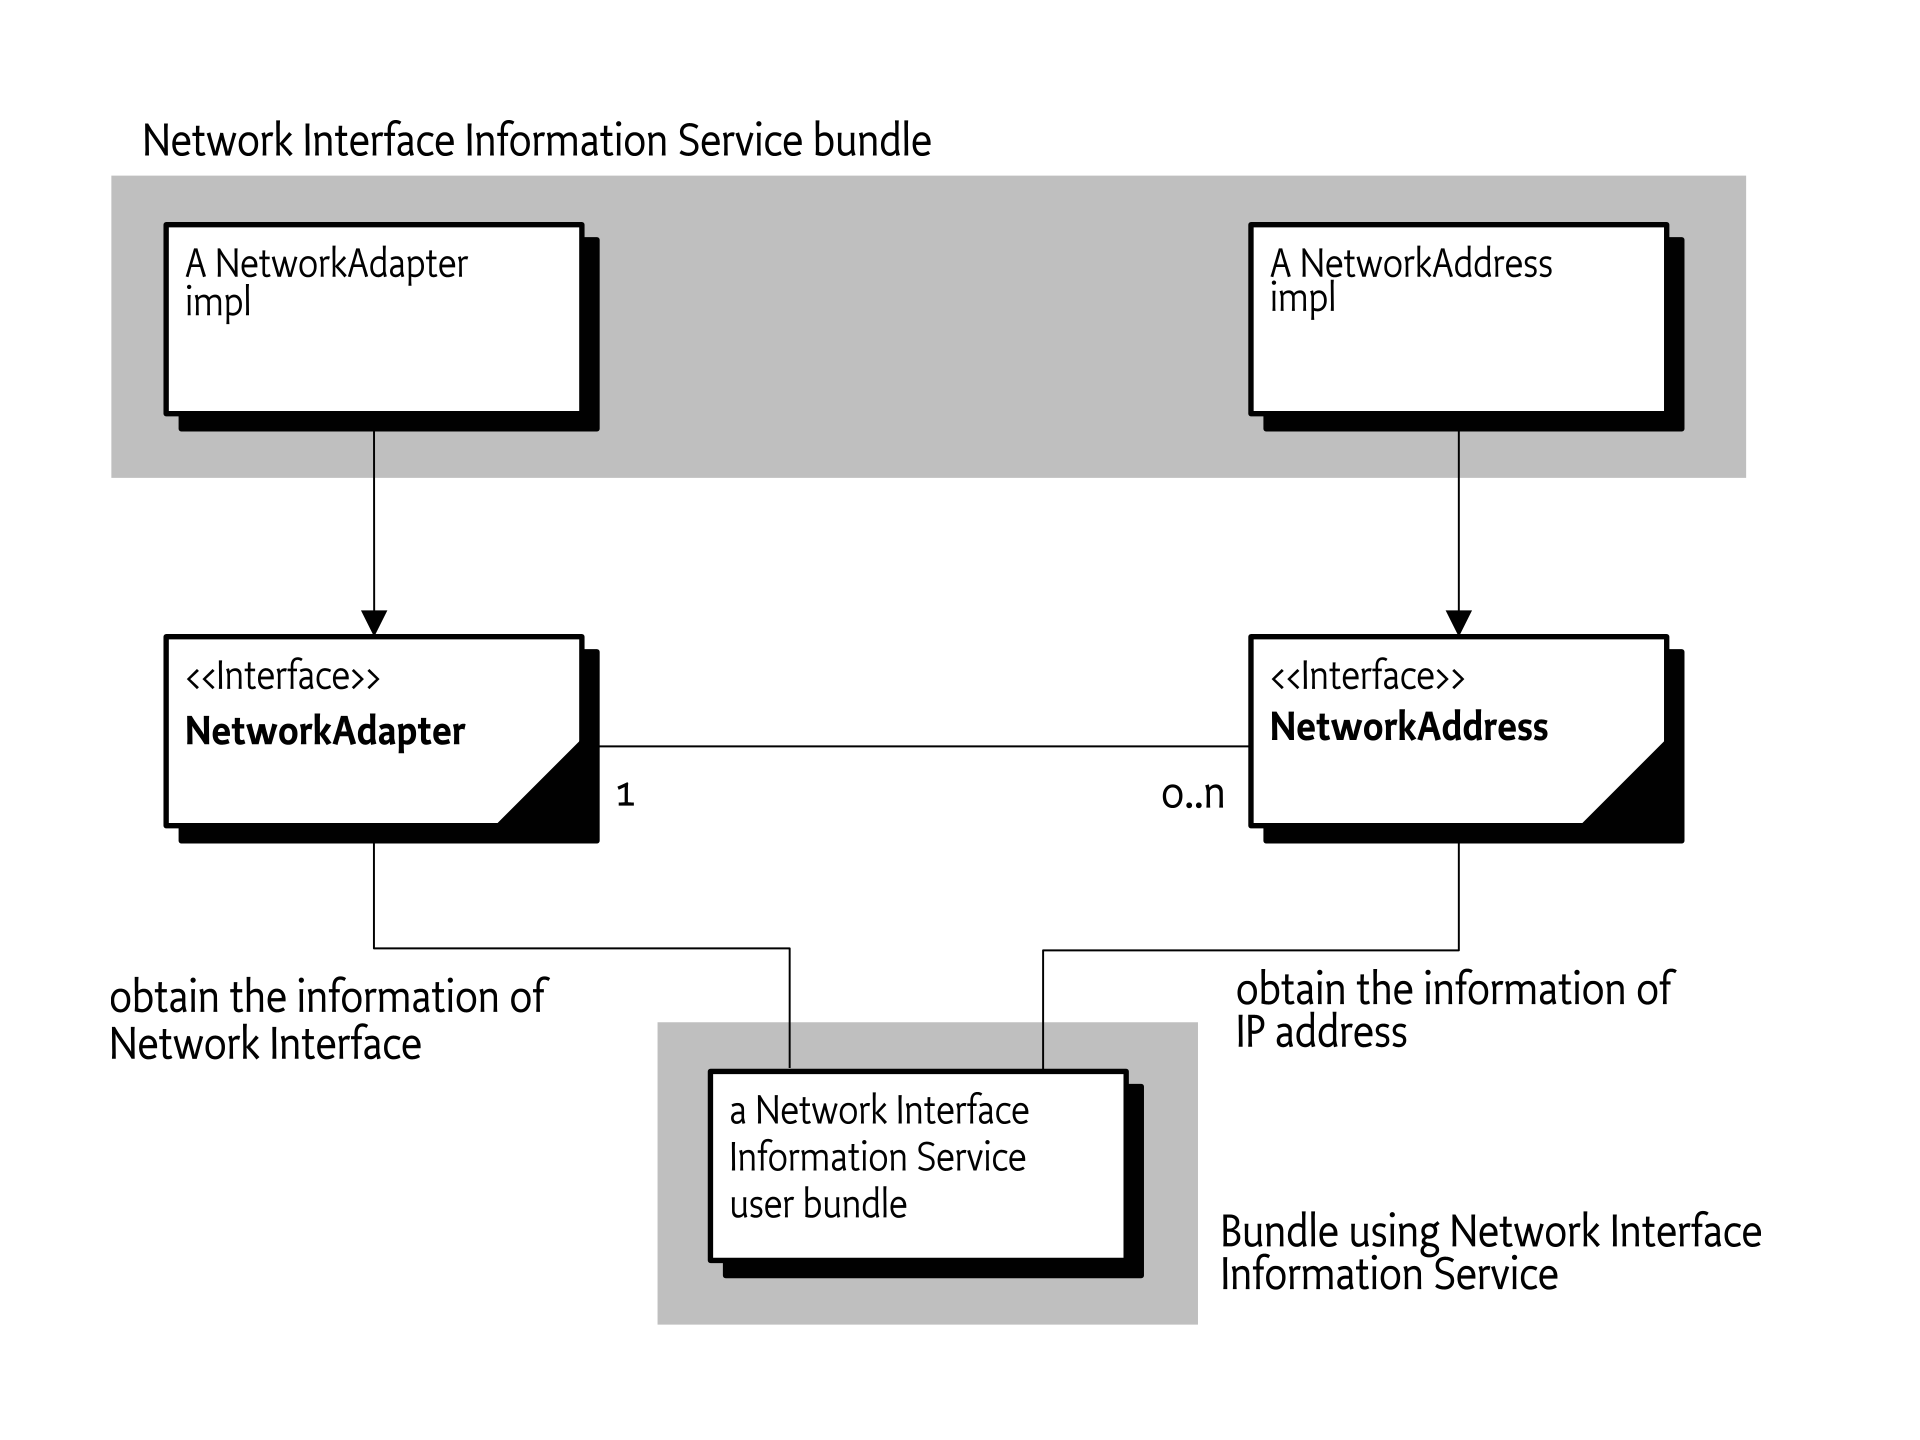 Network Interface Information Service Overview Diagram